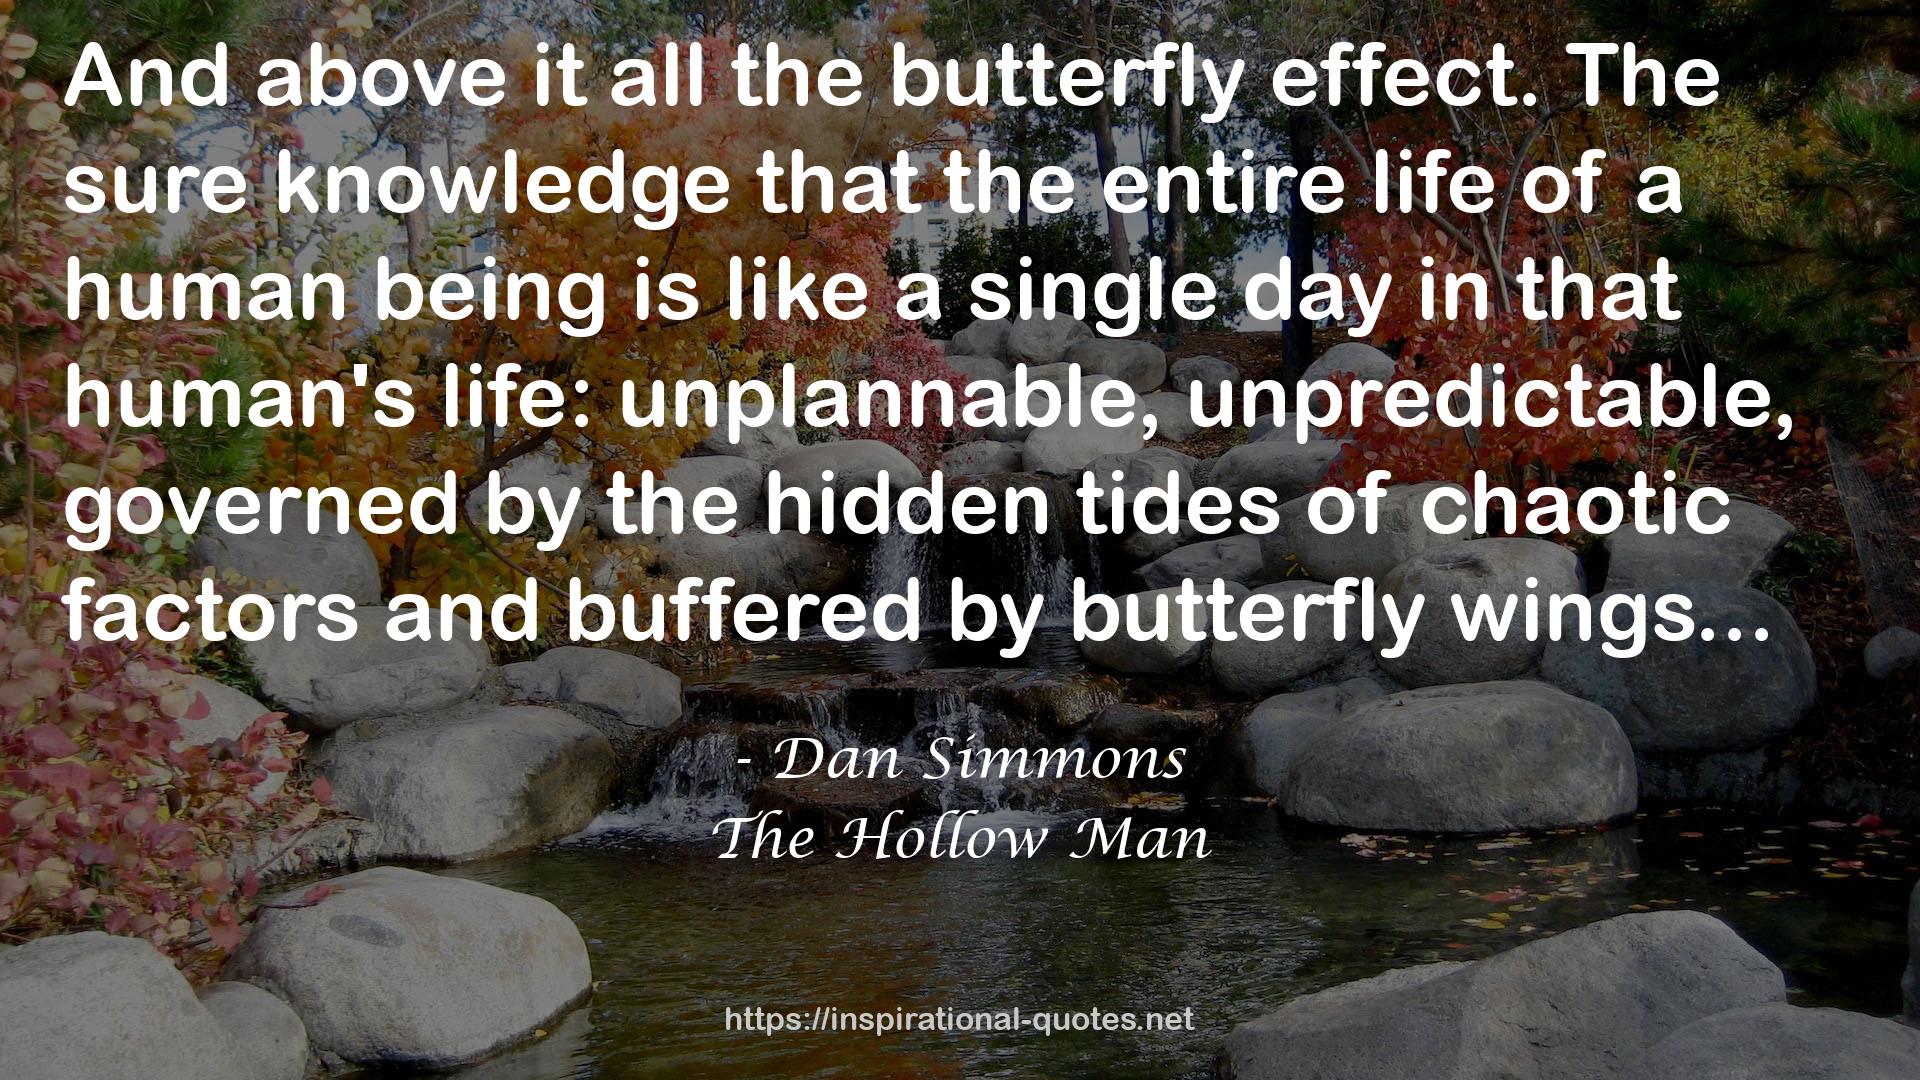 The Hollow Man QUOTES